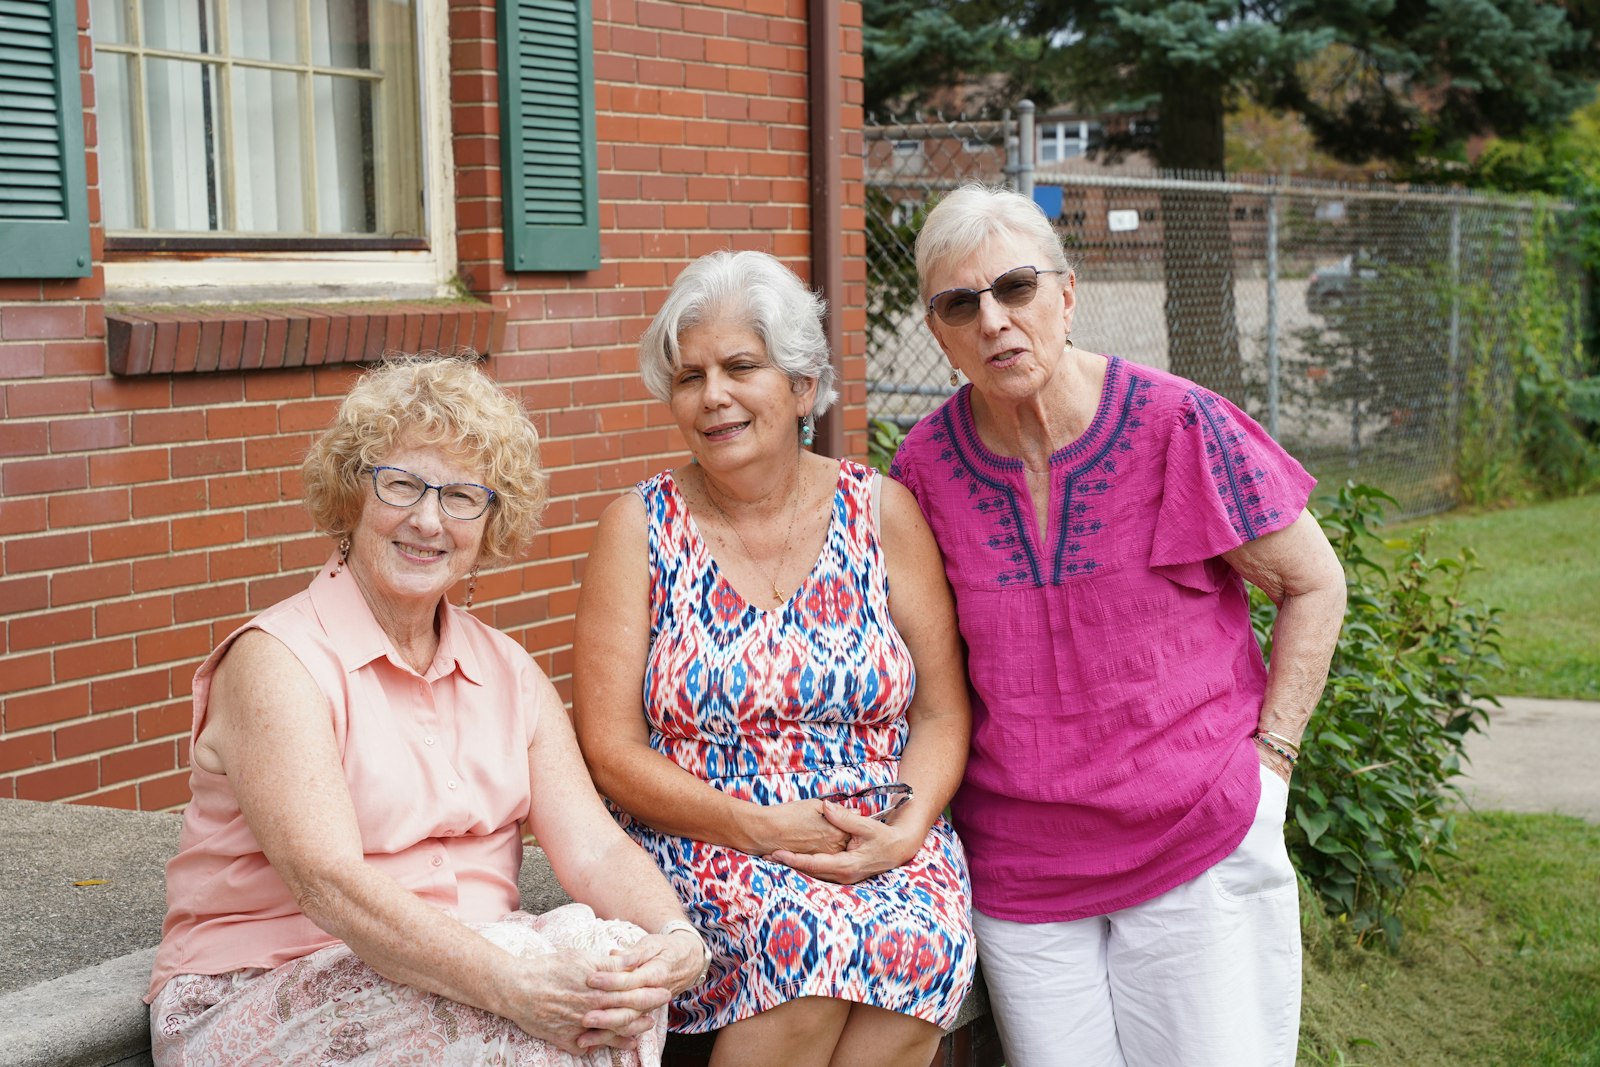 Linda Tomala, Jean Krystyniak and Karen Seefelt are the three "grandmothers" of Bakhita House, the go-to volunteers who look out for the needs of the house's residents.